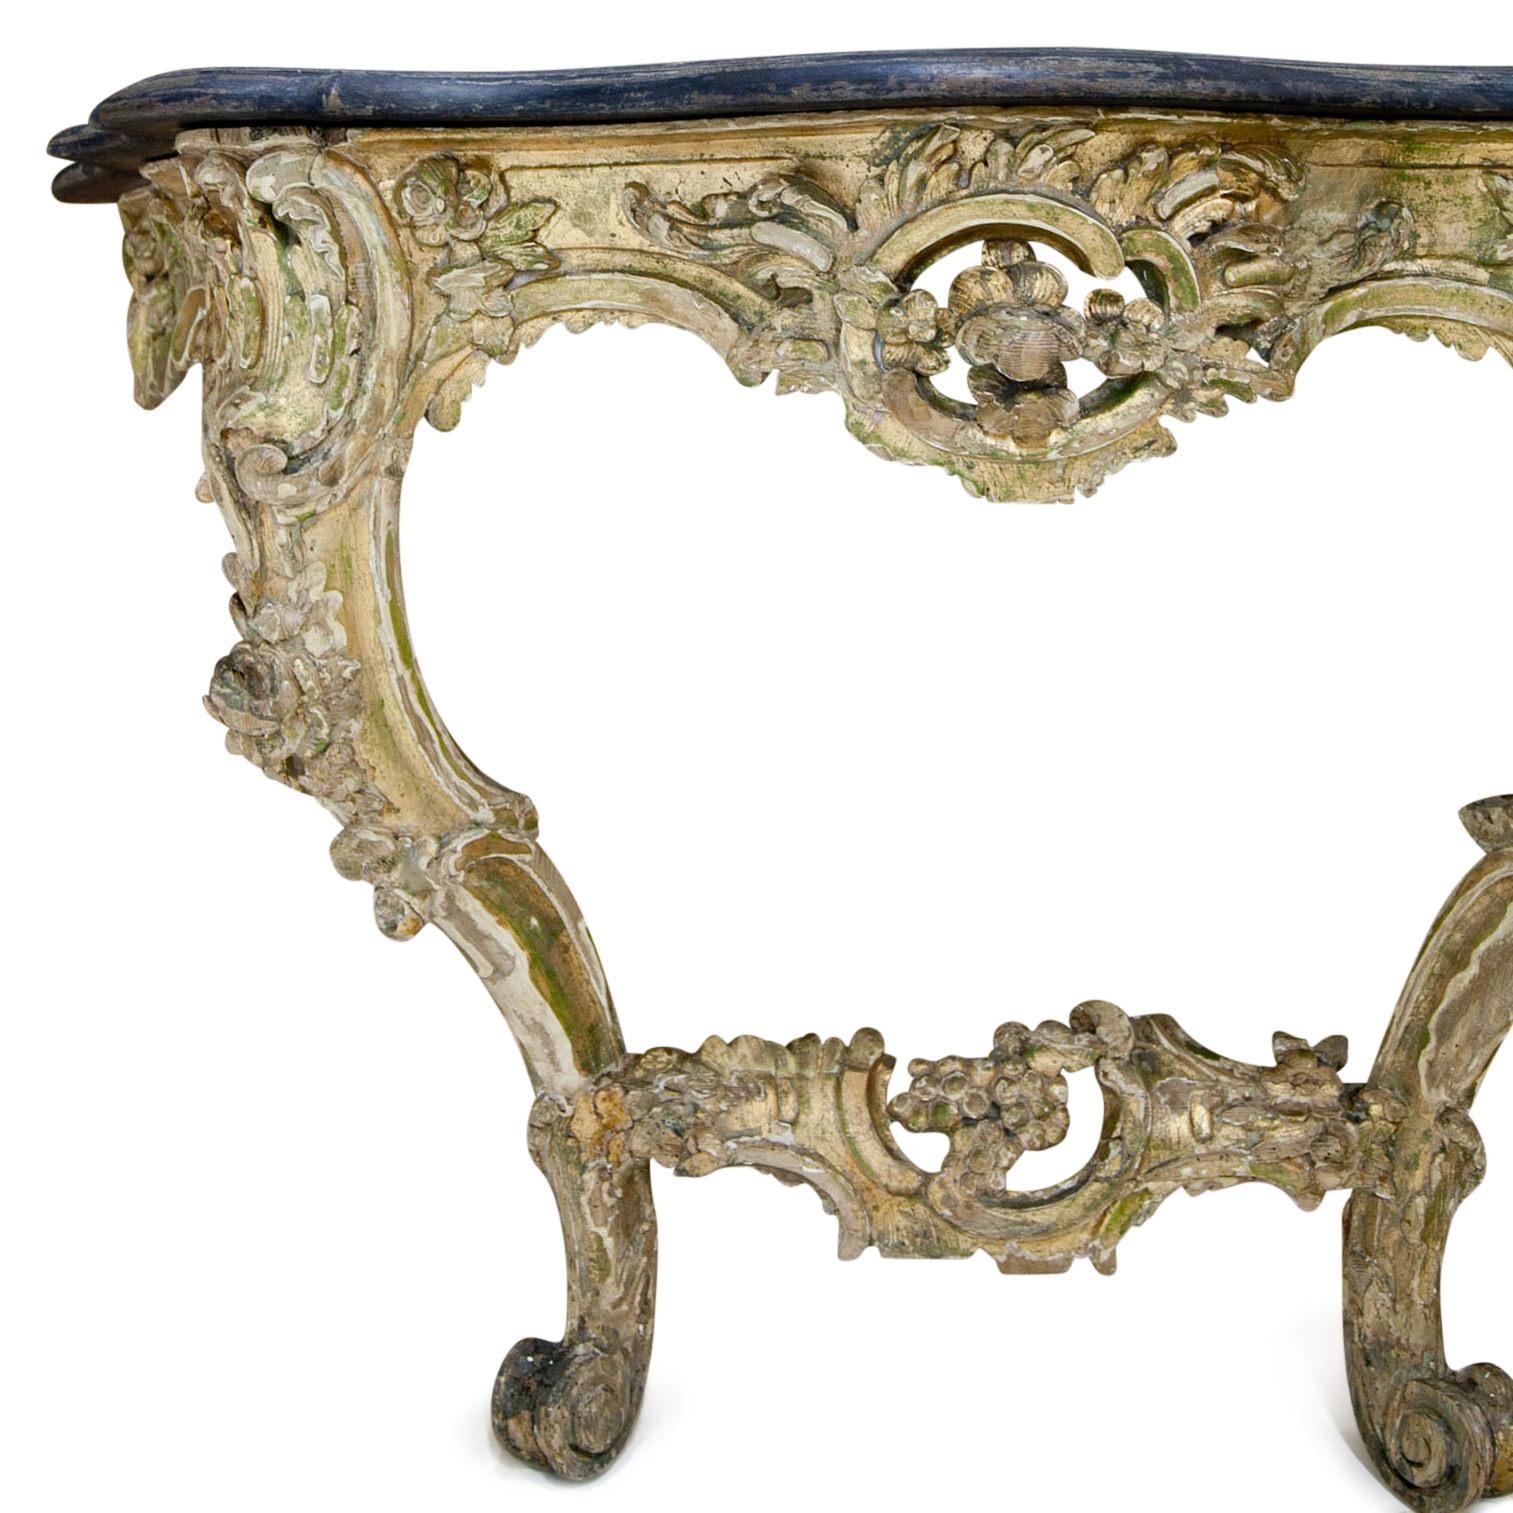 Rococo-style console table with volutes, c-buckles and grape motives. The black painted top shows some wear as well as the gilding.